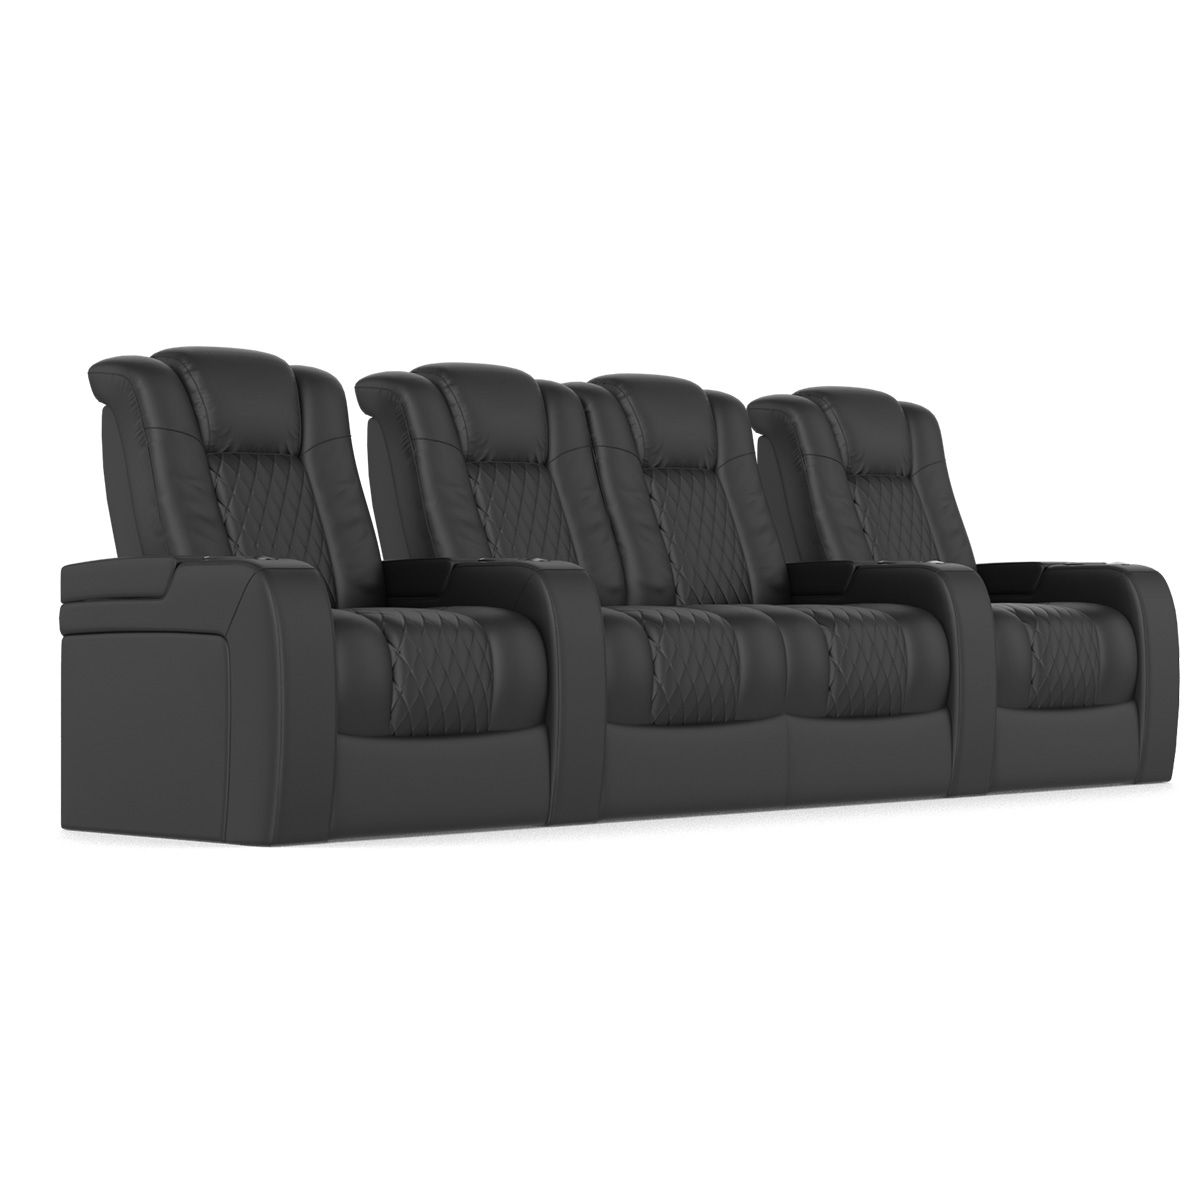 Audio Advice Revelation Home Theater Seating - angled front view of 4 chair row with center loveseat